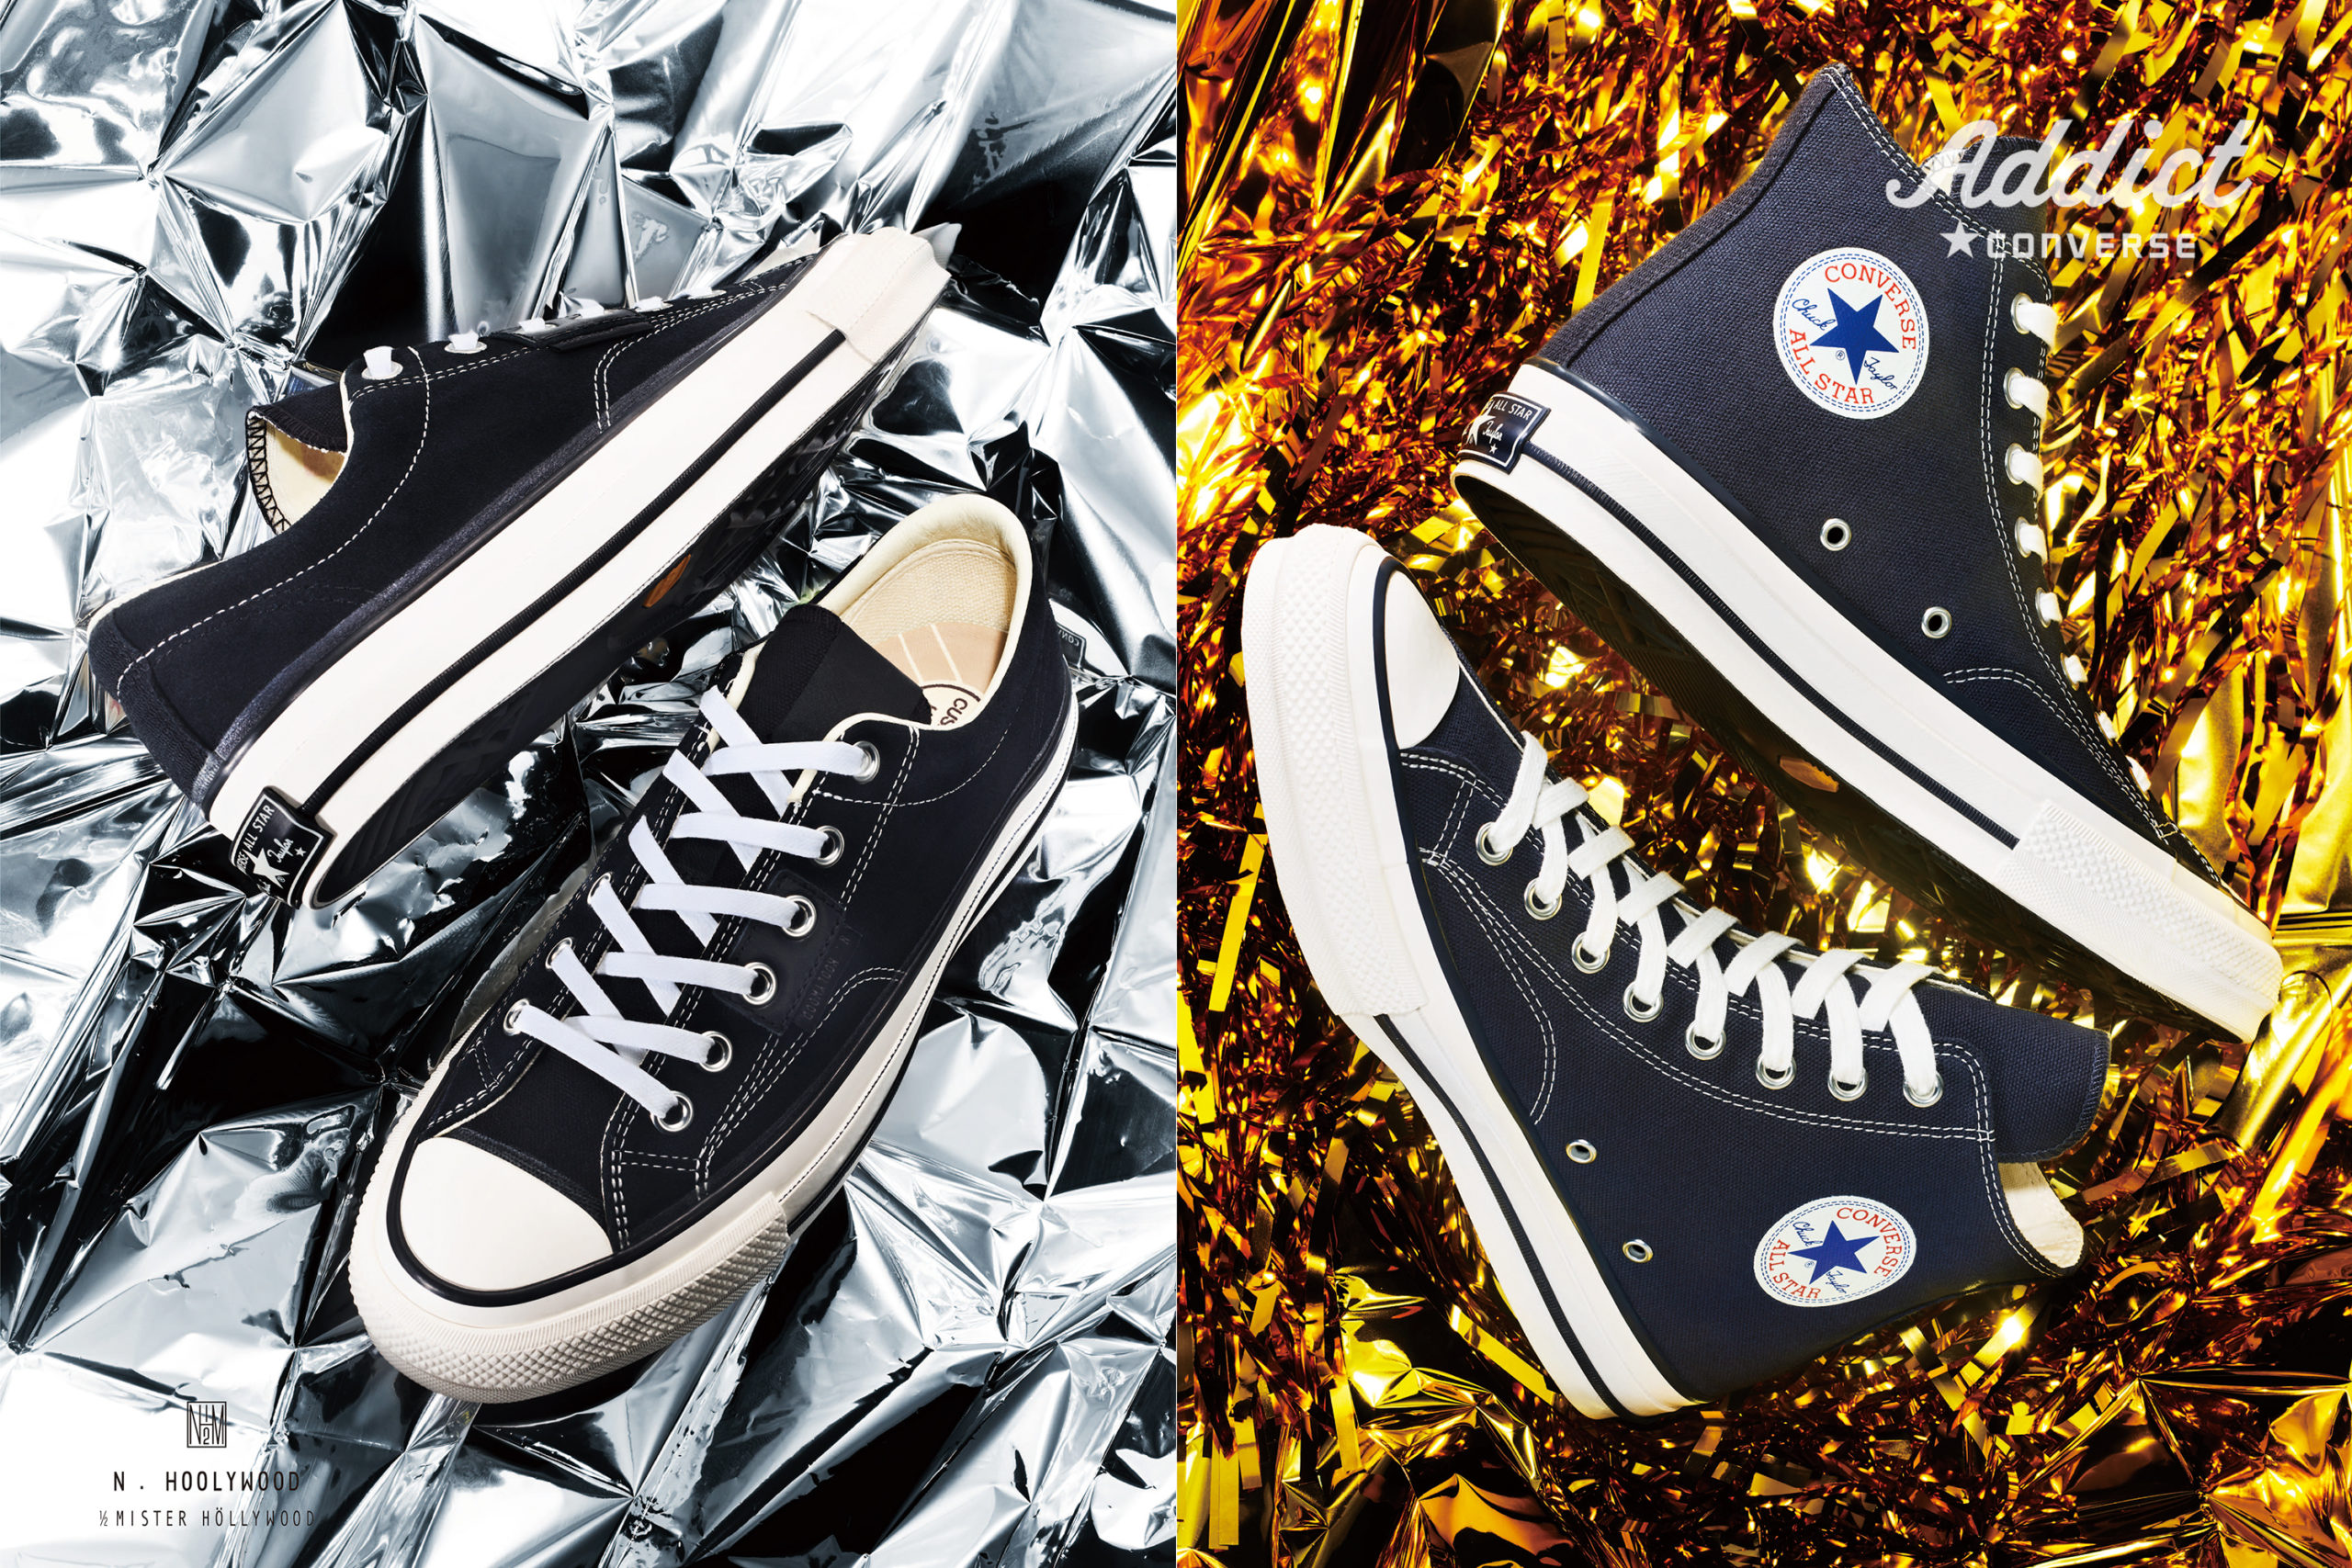 CONVERSE ADDICT 2022 HOLIDAY COLLECTION